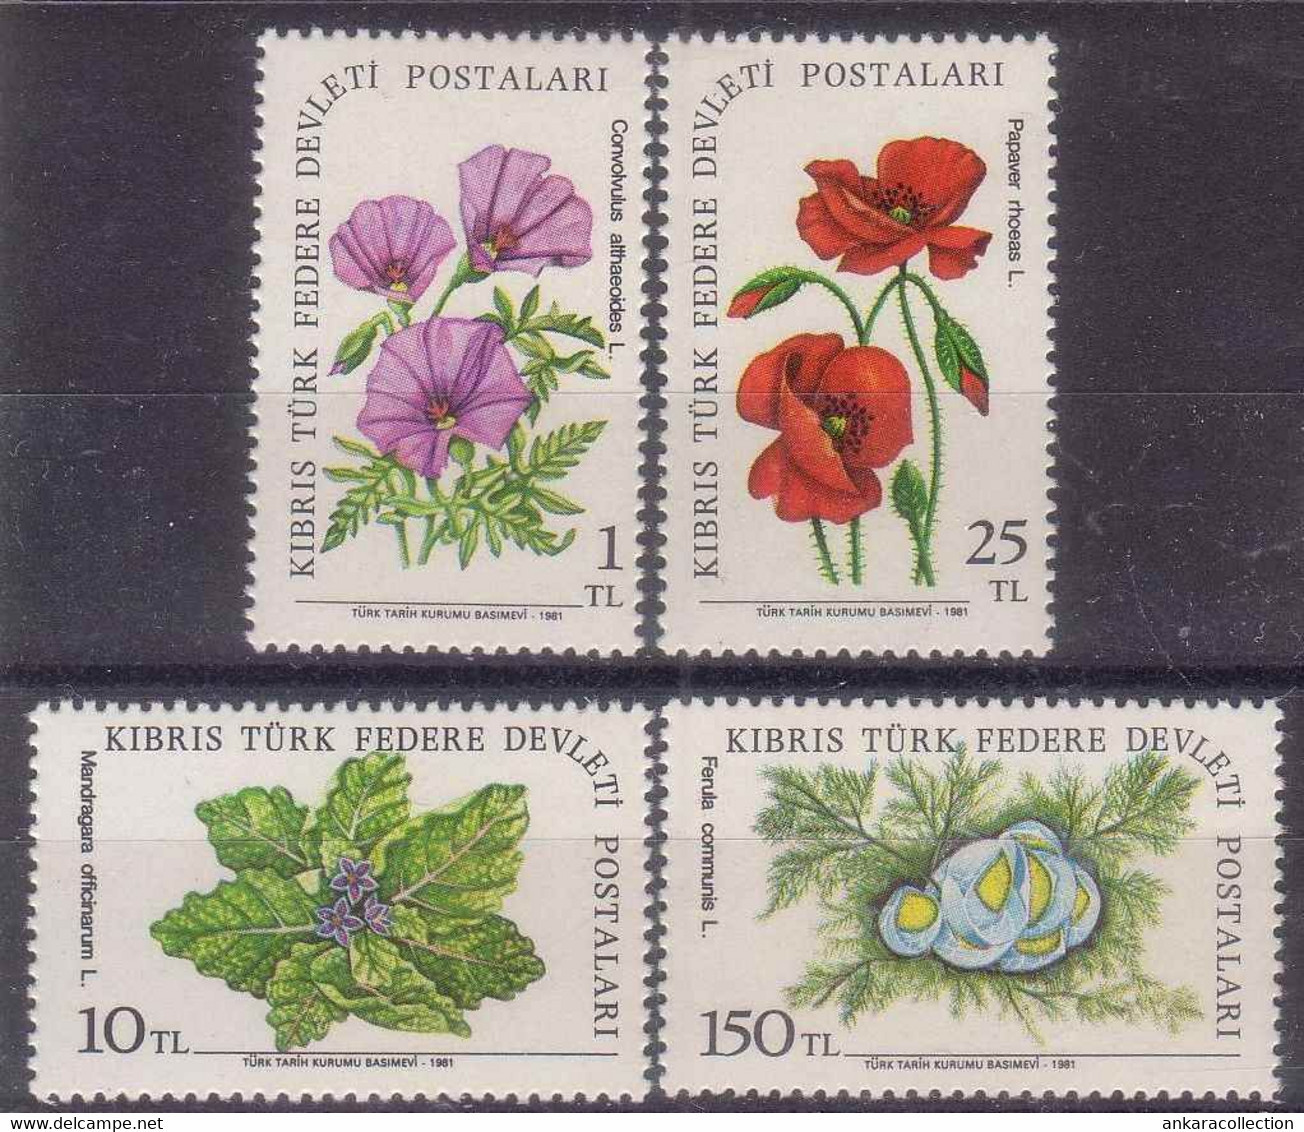 AC - NORTHERN CYPRUS STAMP - FIELD FLOWERS MNH 28 SEPTEMBER 1981 - Neufs